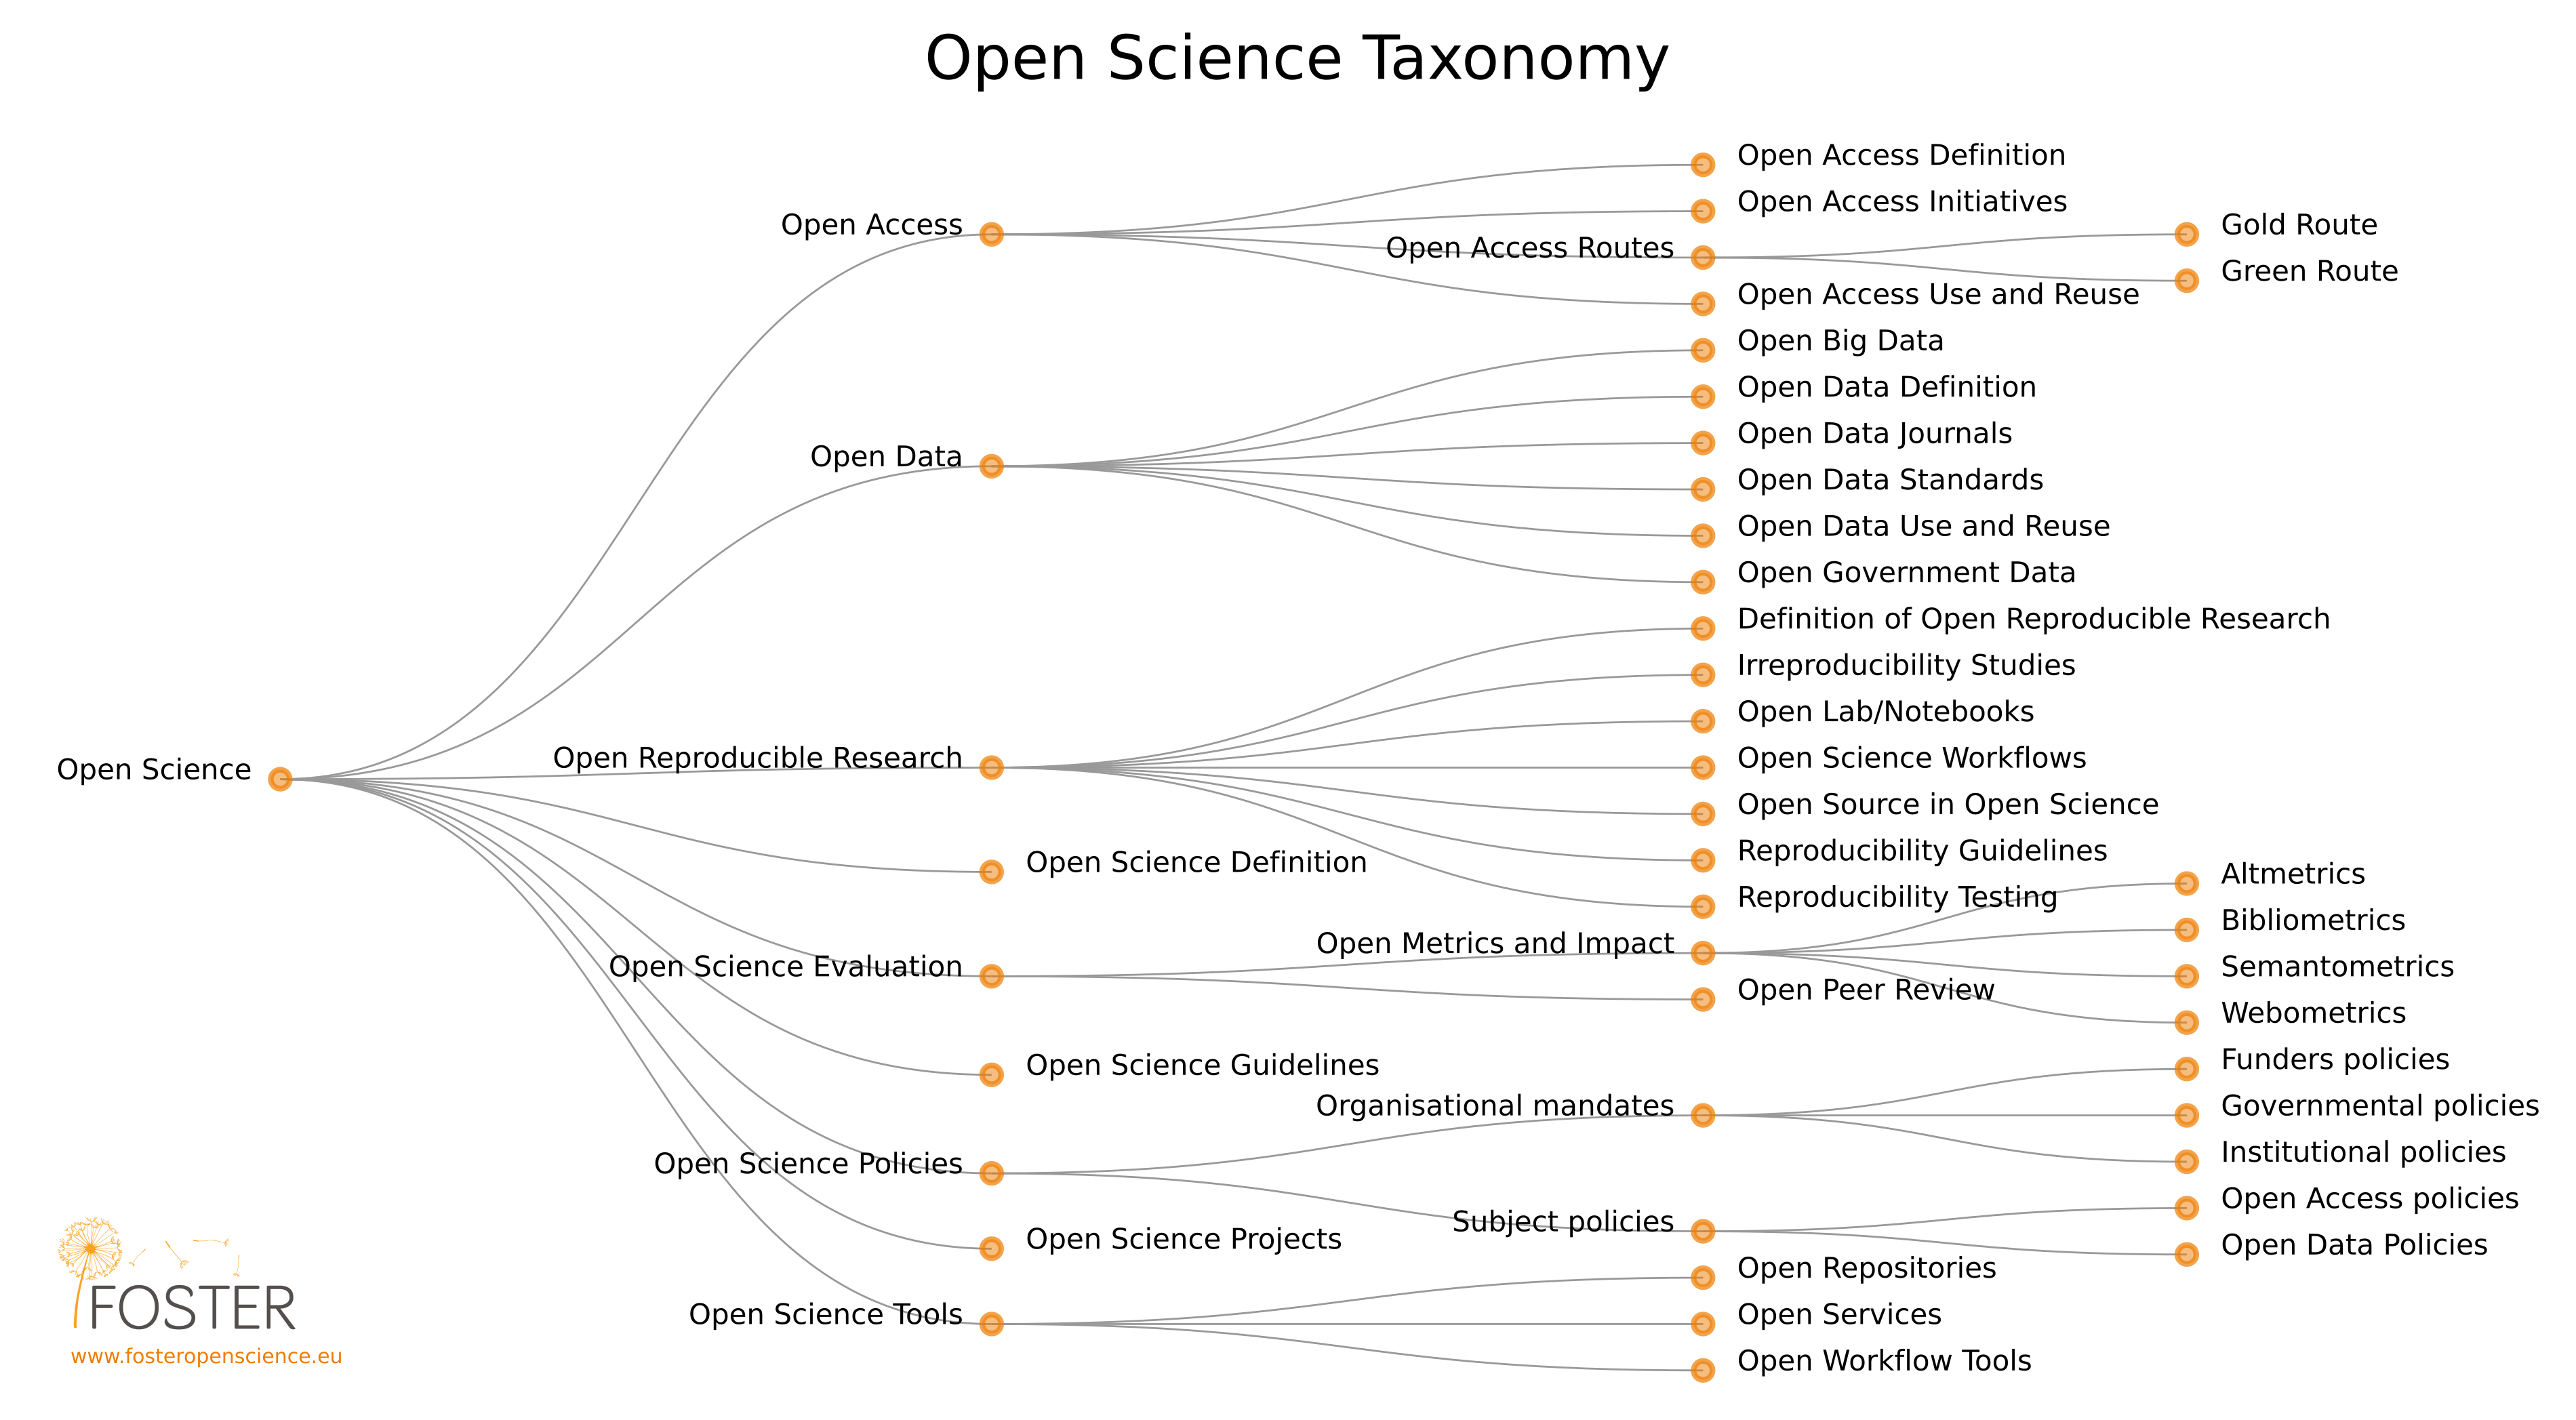 A mindmap as a graphical representation of an Open Science taxonomy